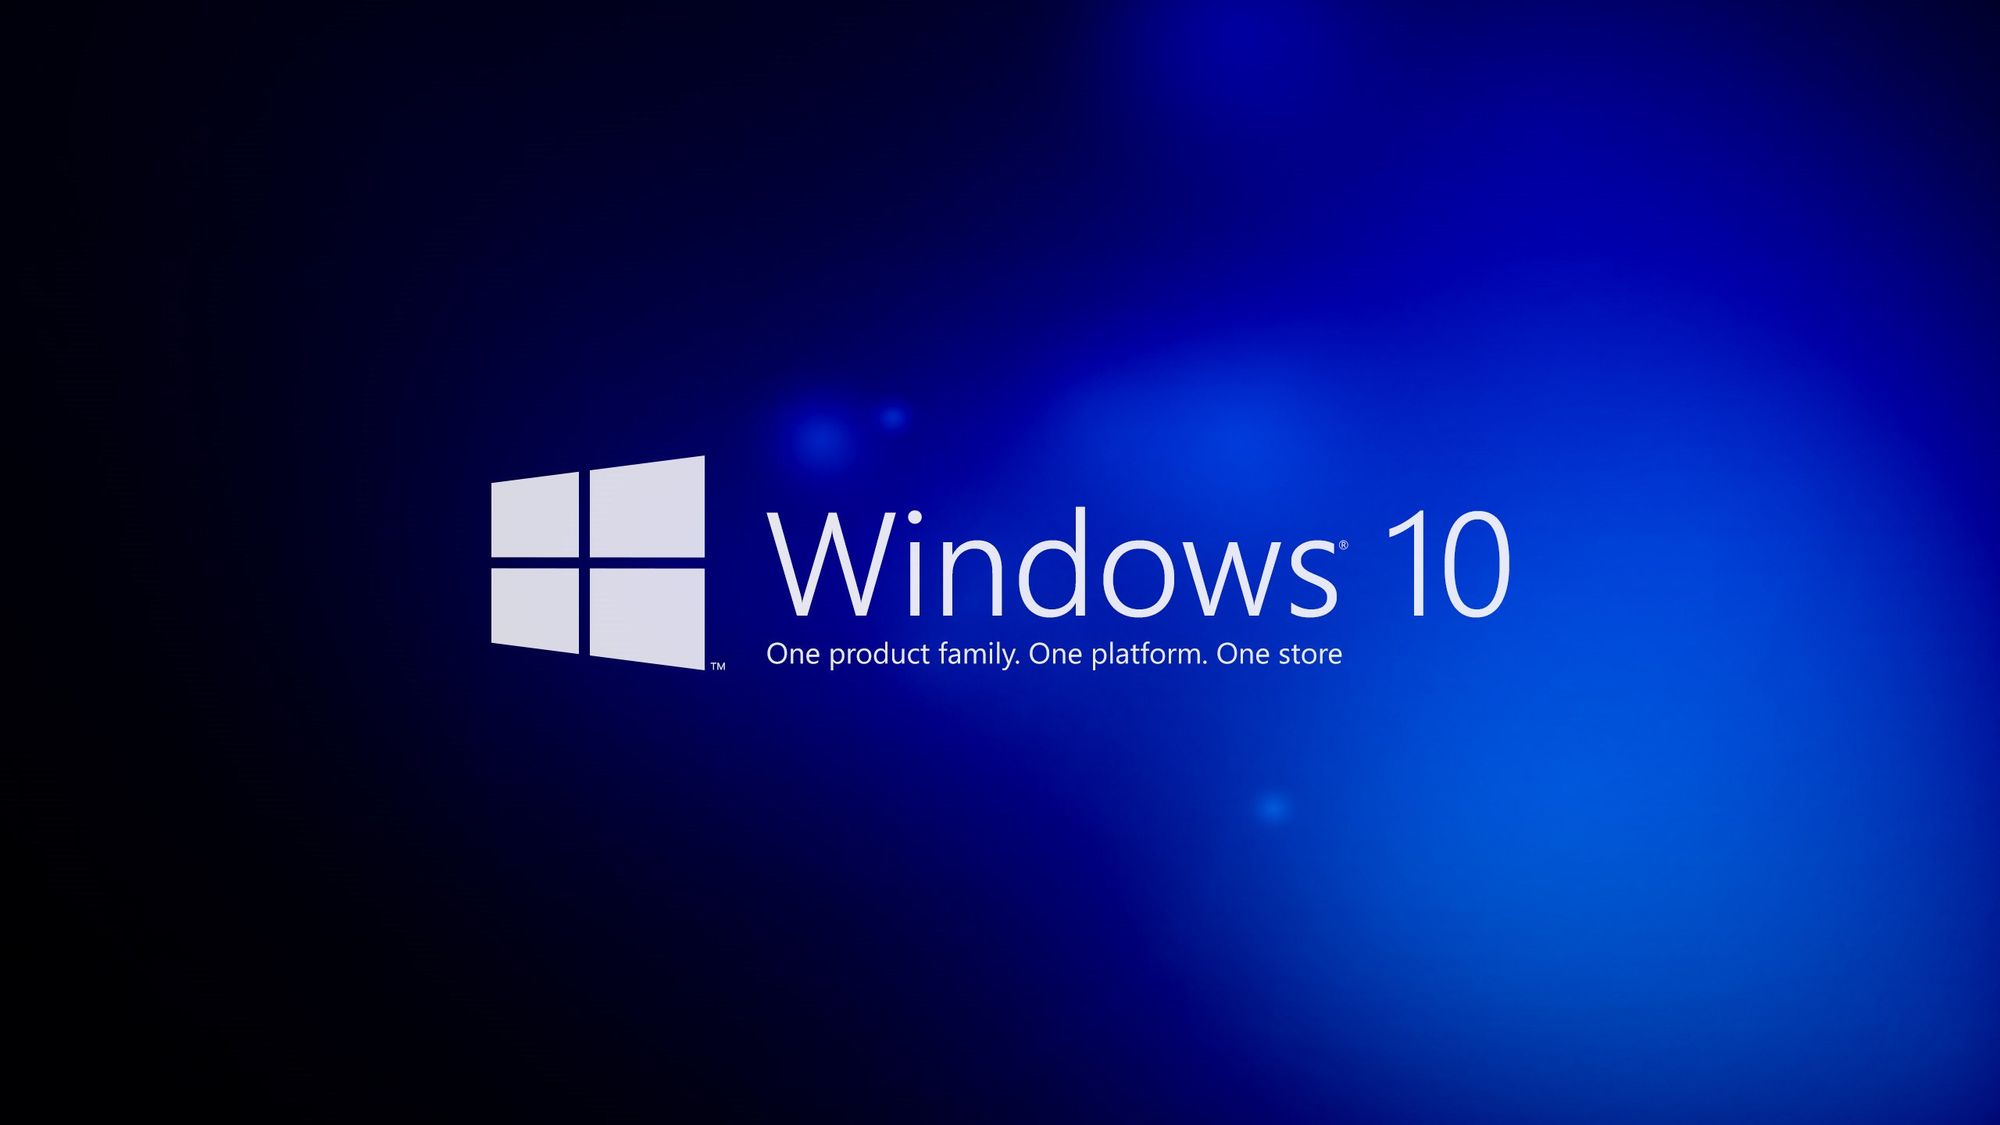 Windows 10 Dogged by Privacy Concerns